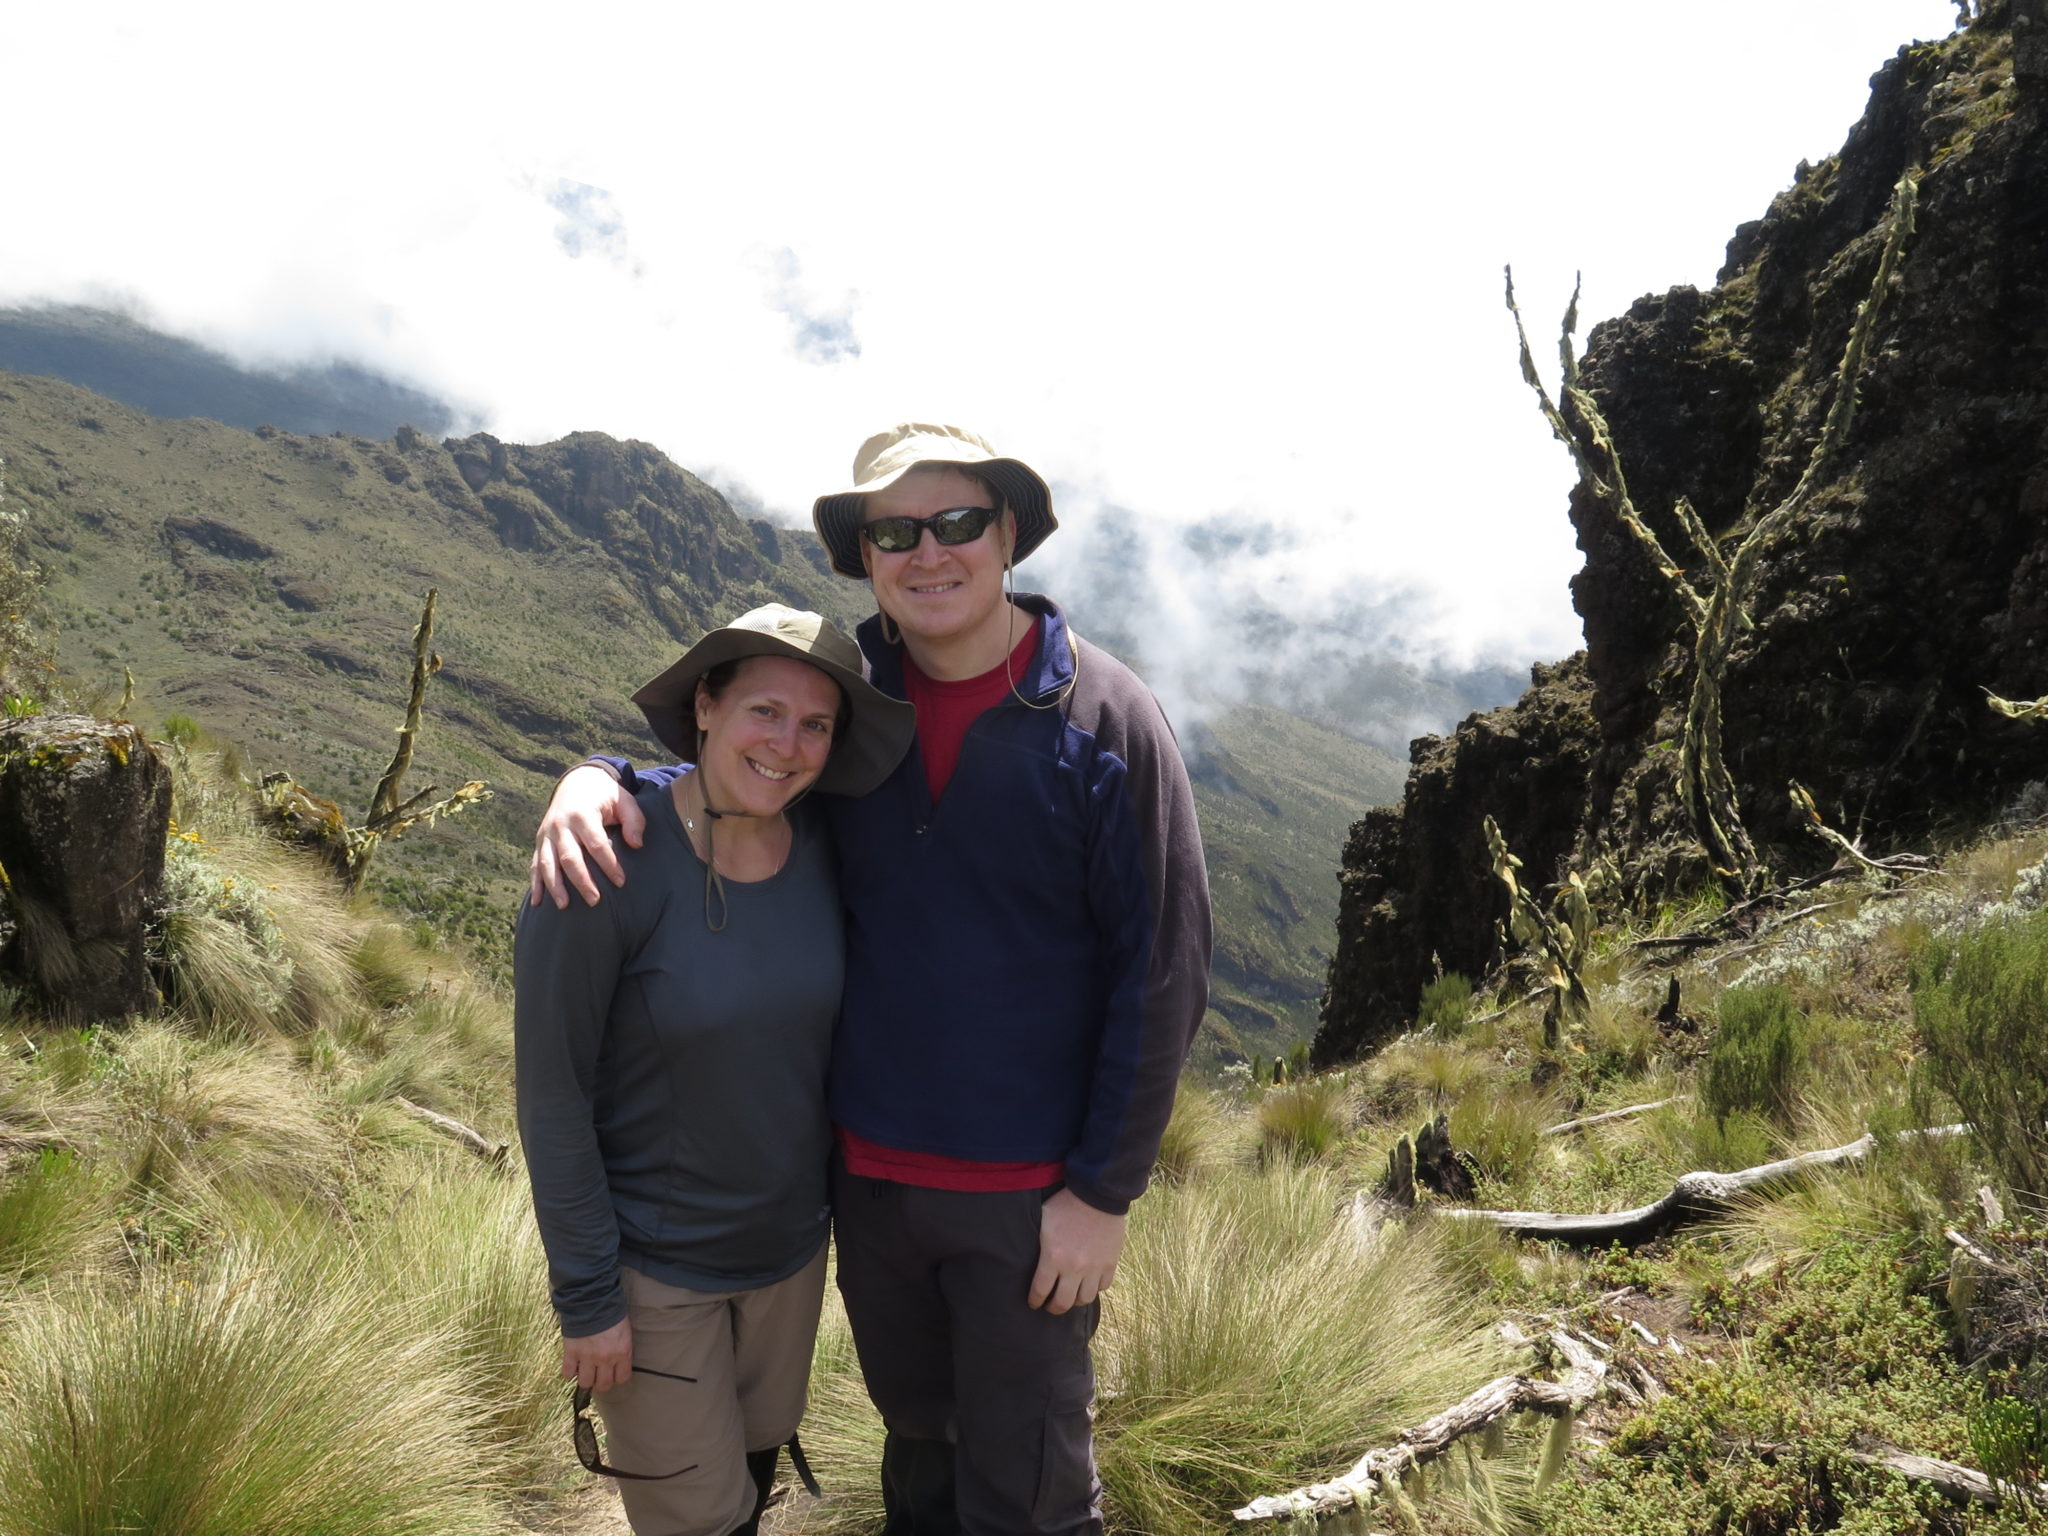 Patrick S. and his companion pose in a section of greenery on Kilimanjaro